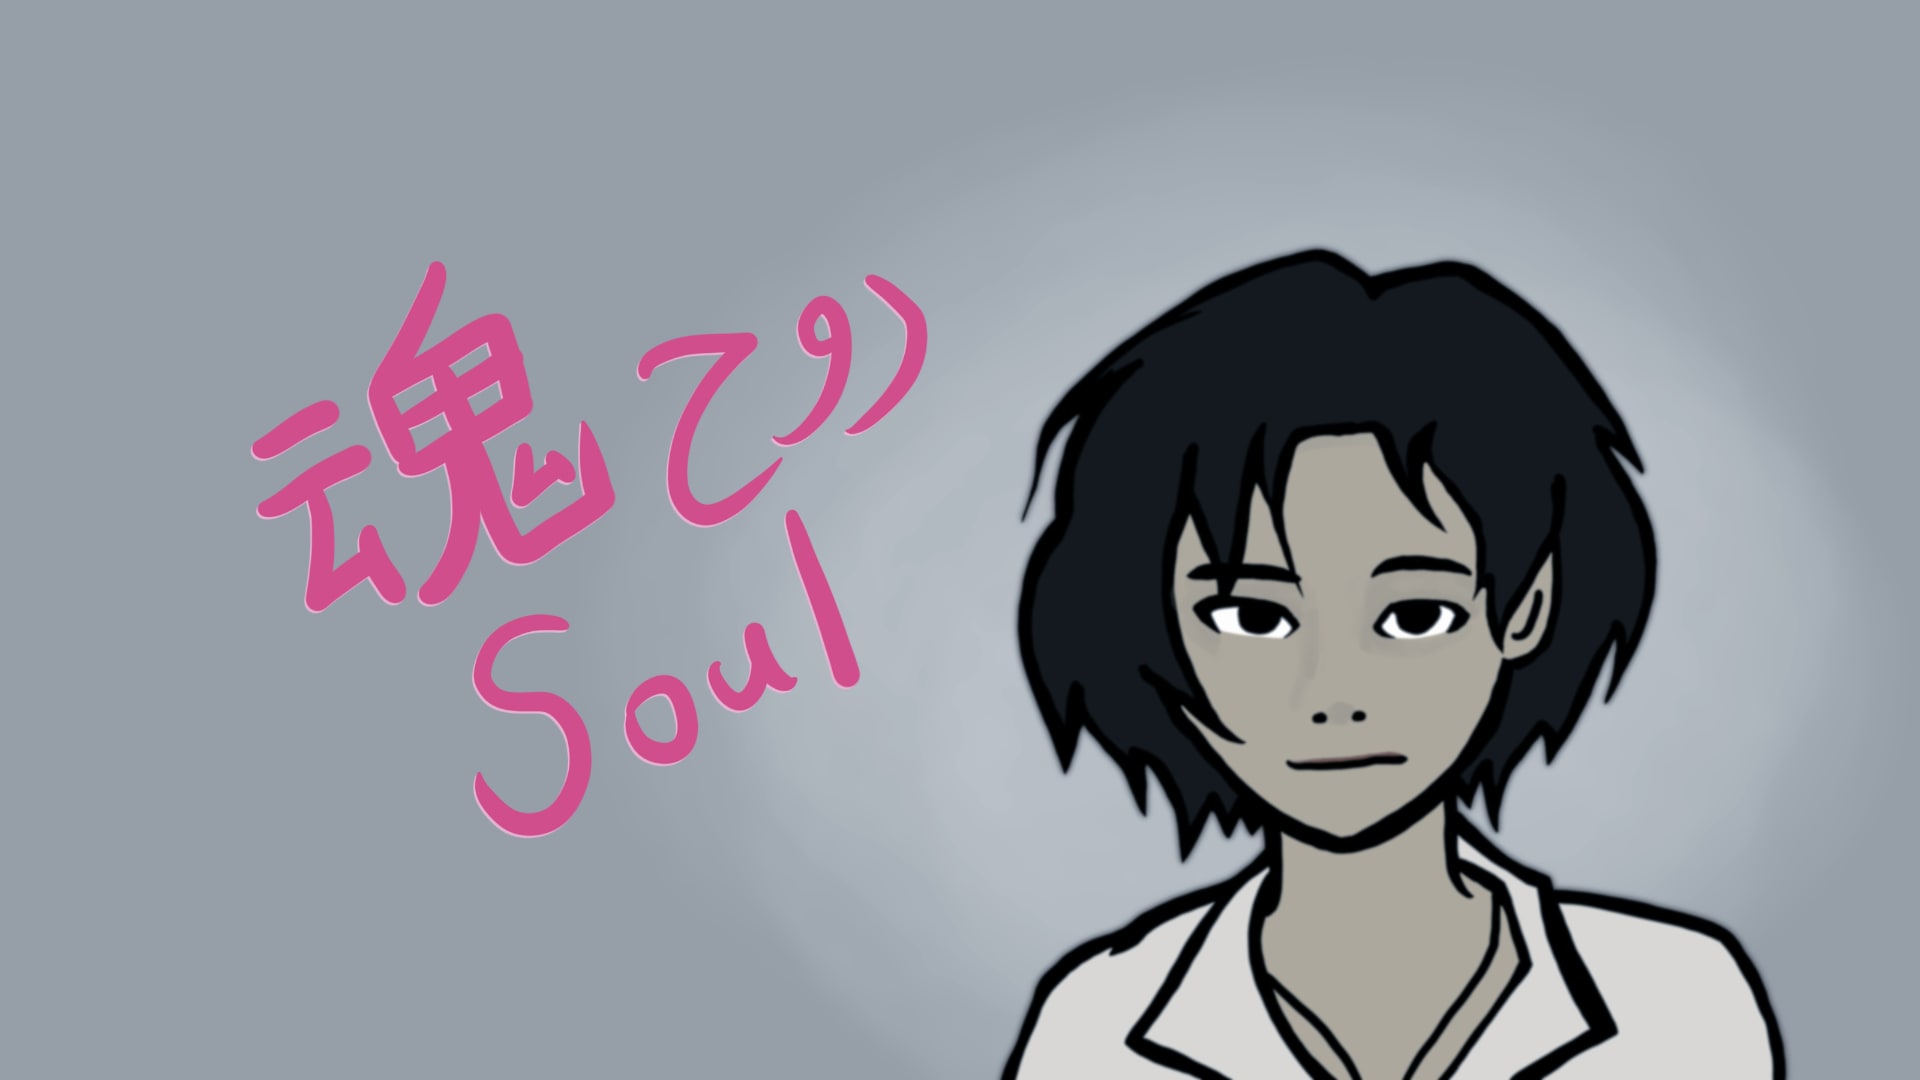 A doodle of Fang from Detention with the word soul in Chinese, Malay, and English on the left.